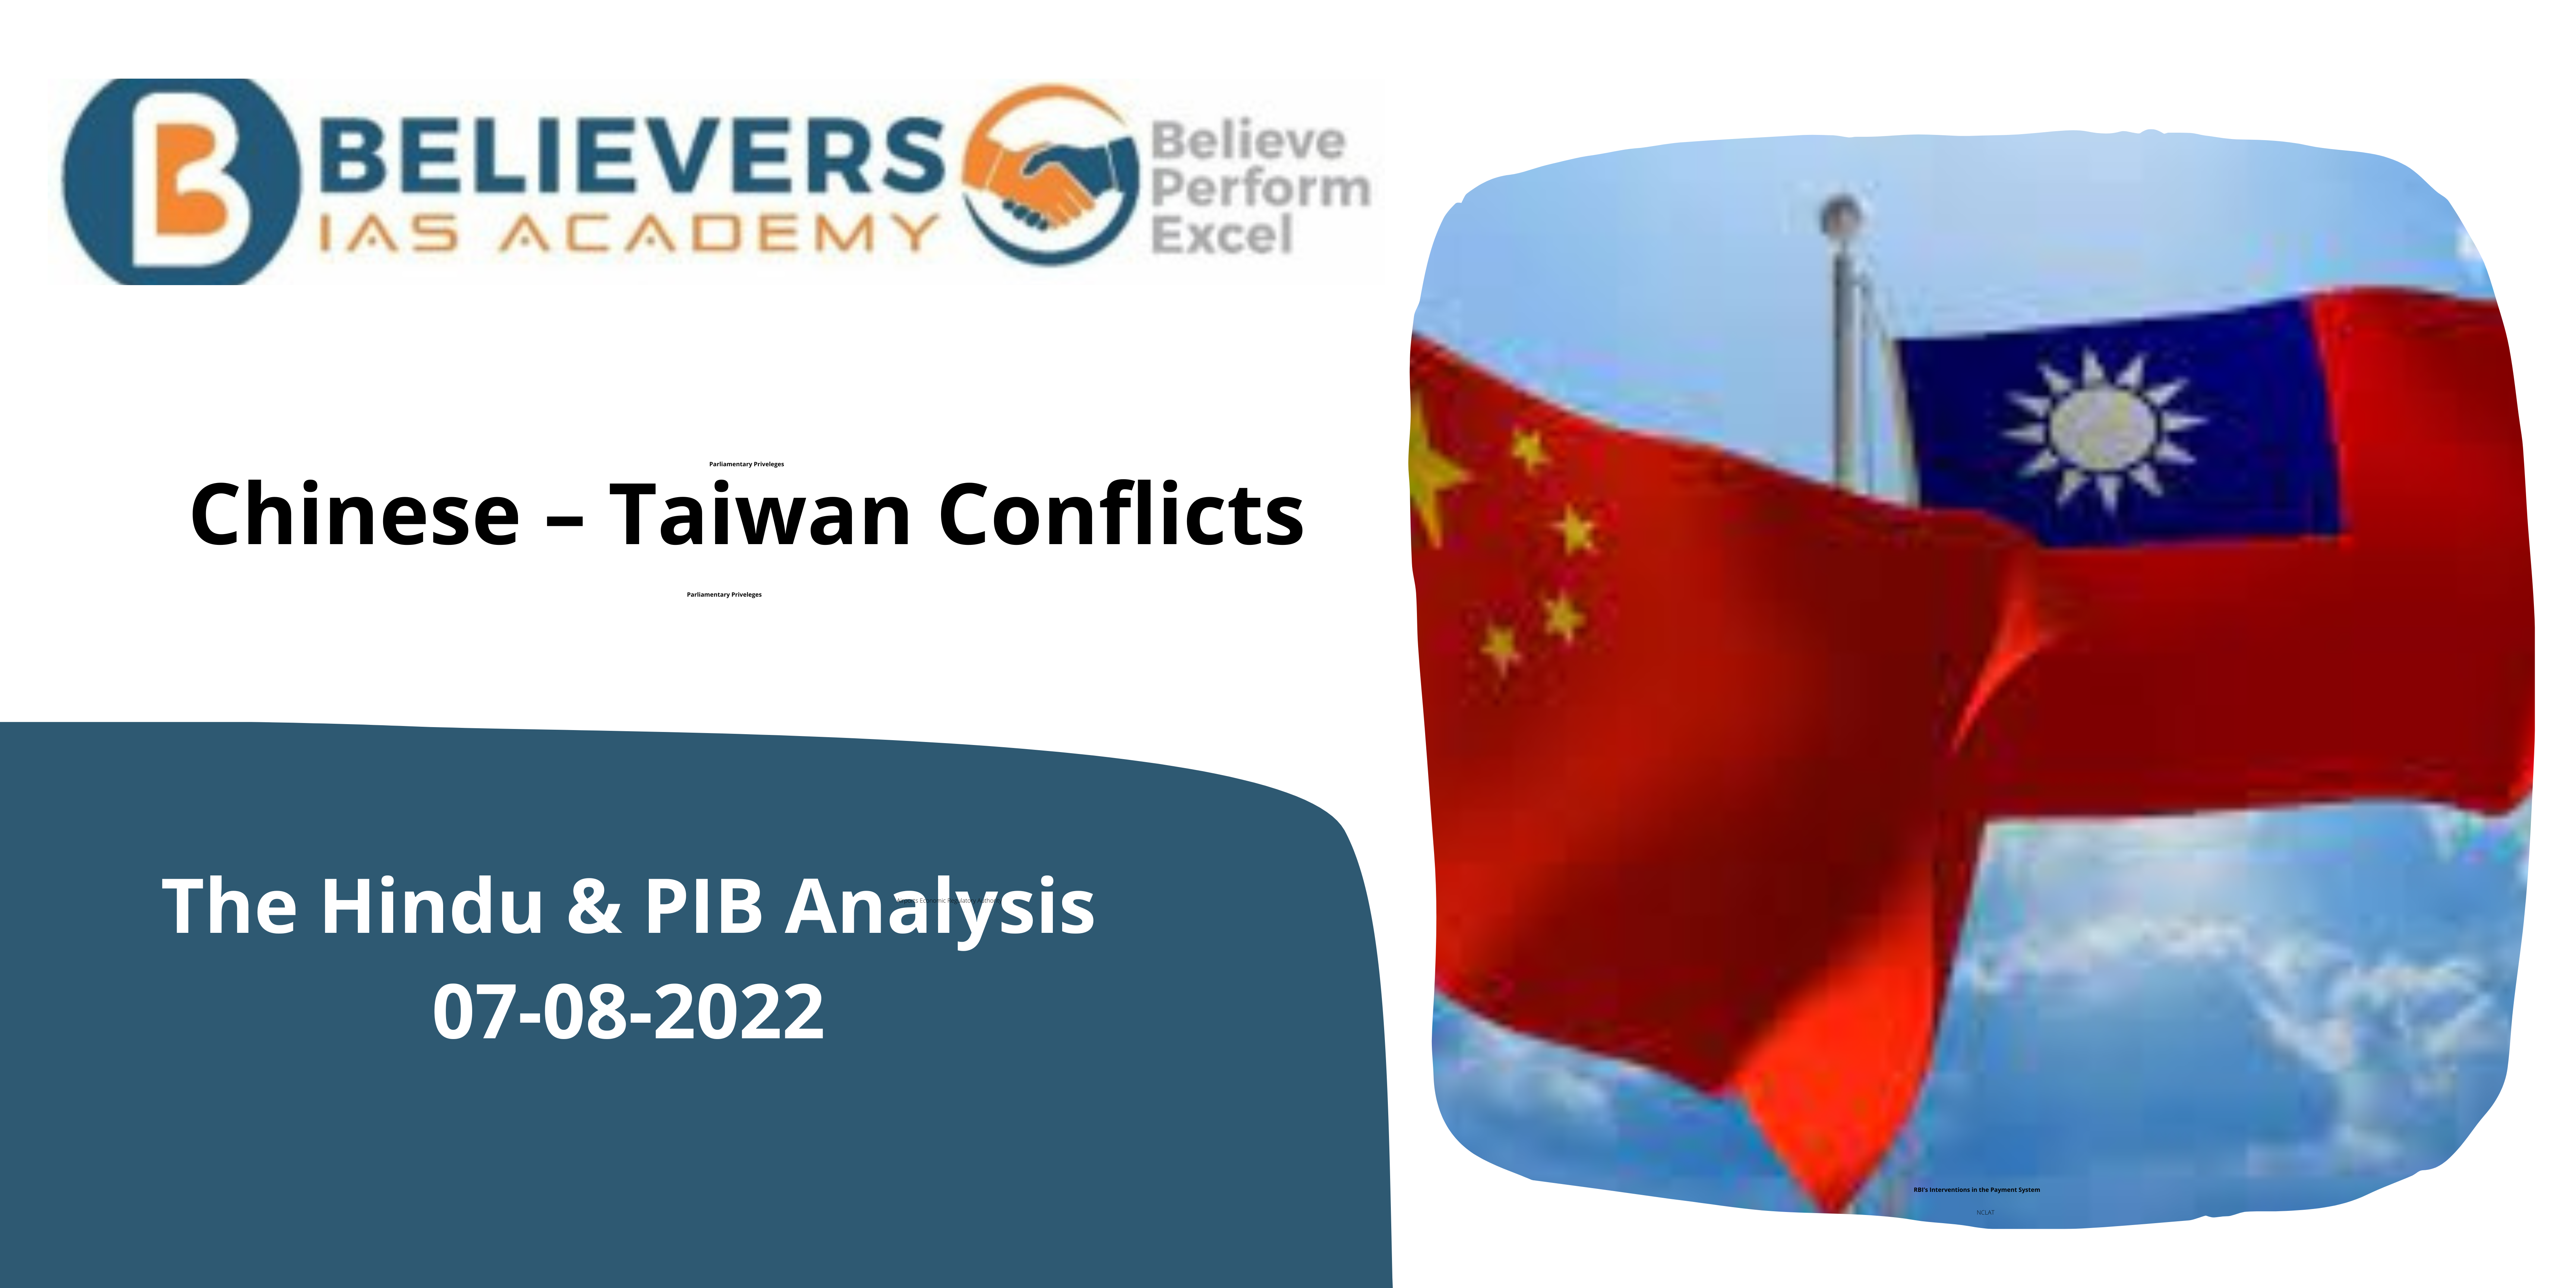 IAS Current affairs - Chinese - Taiwan conflicts